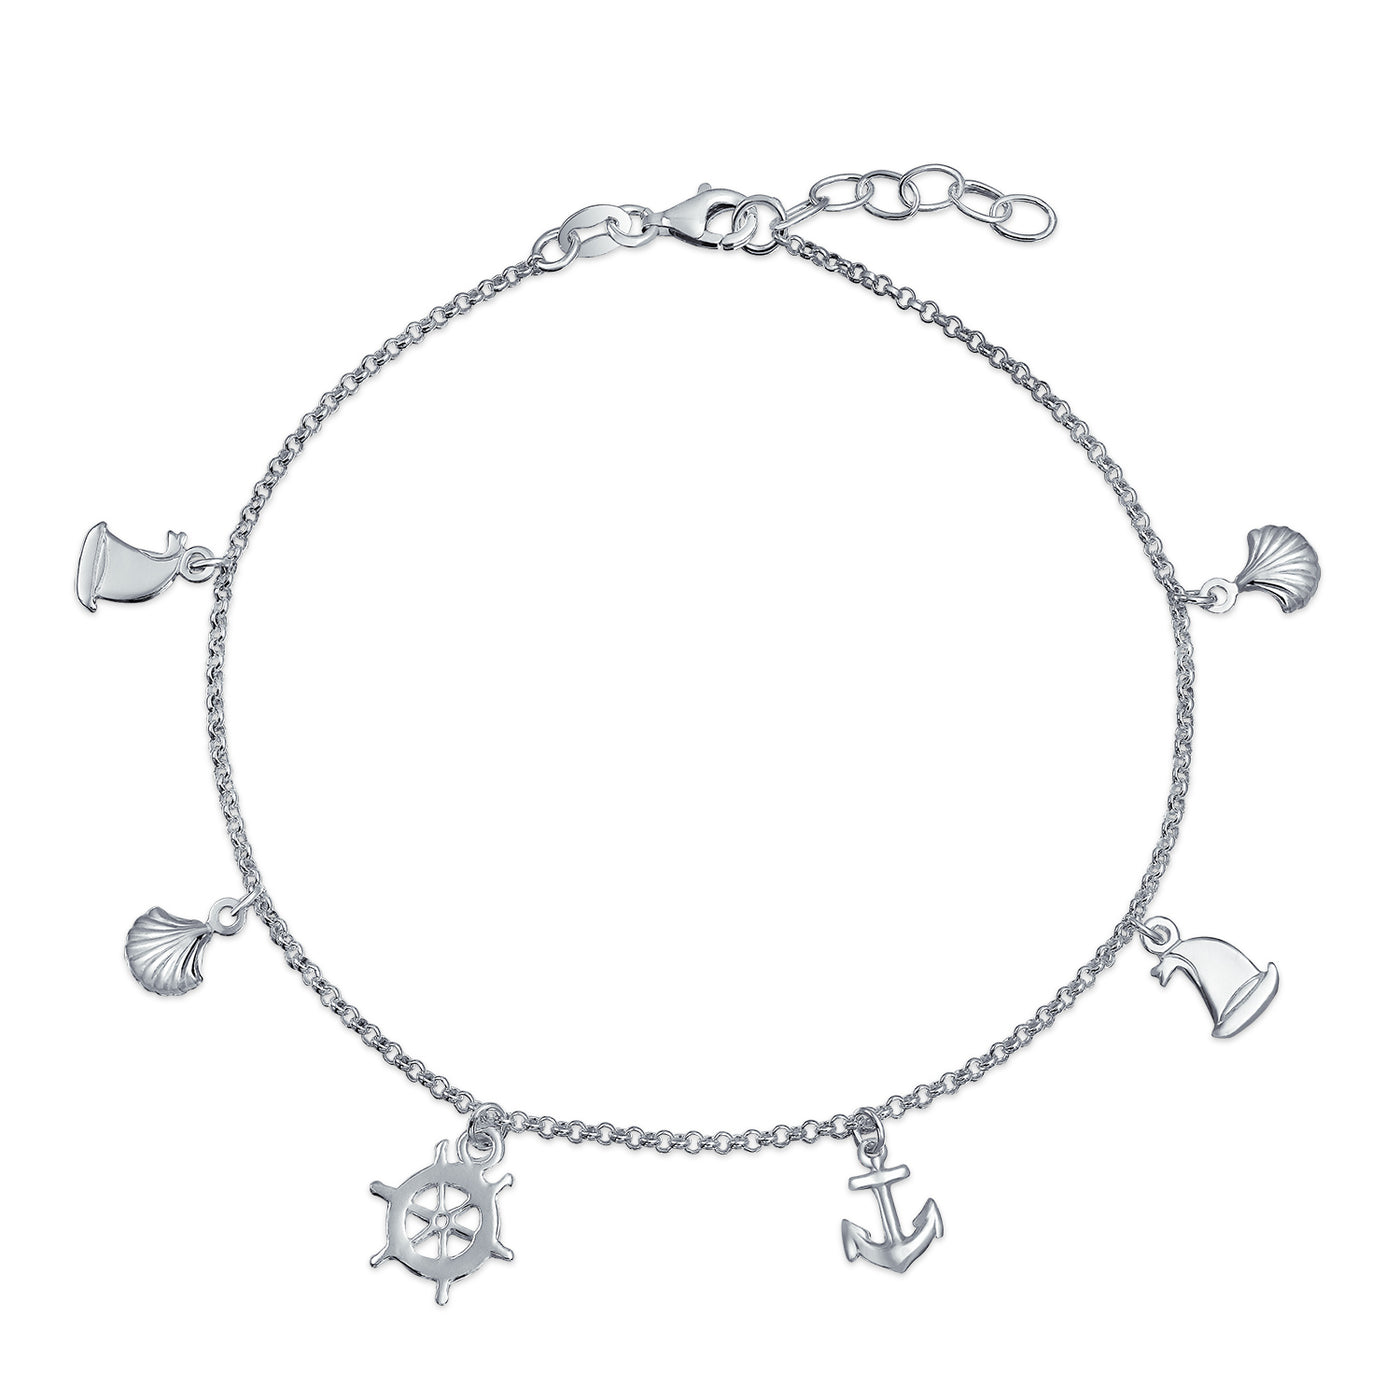 Charm Dangle Anchor Sailboat Ship Wheel Anklet .925 Sterling Silver